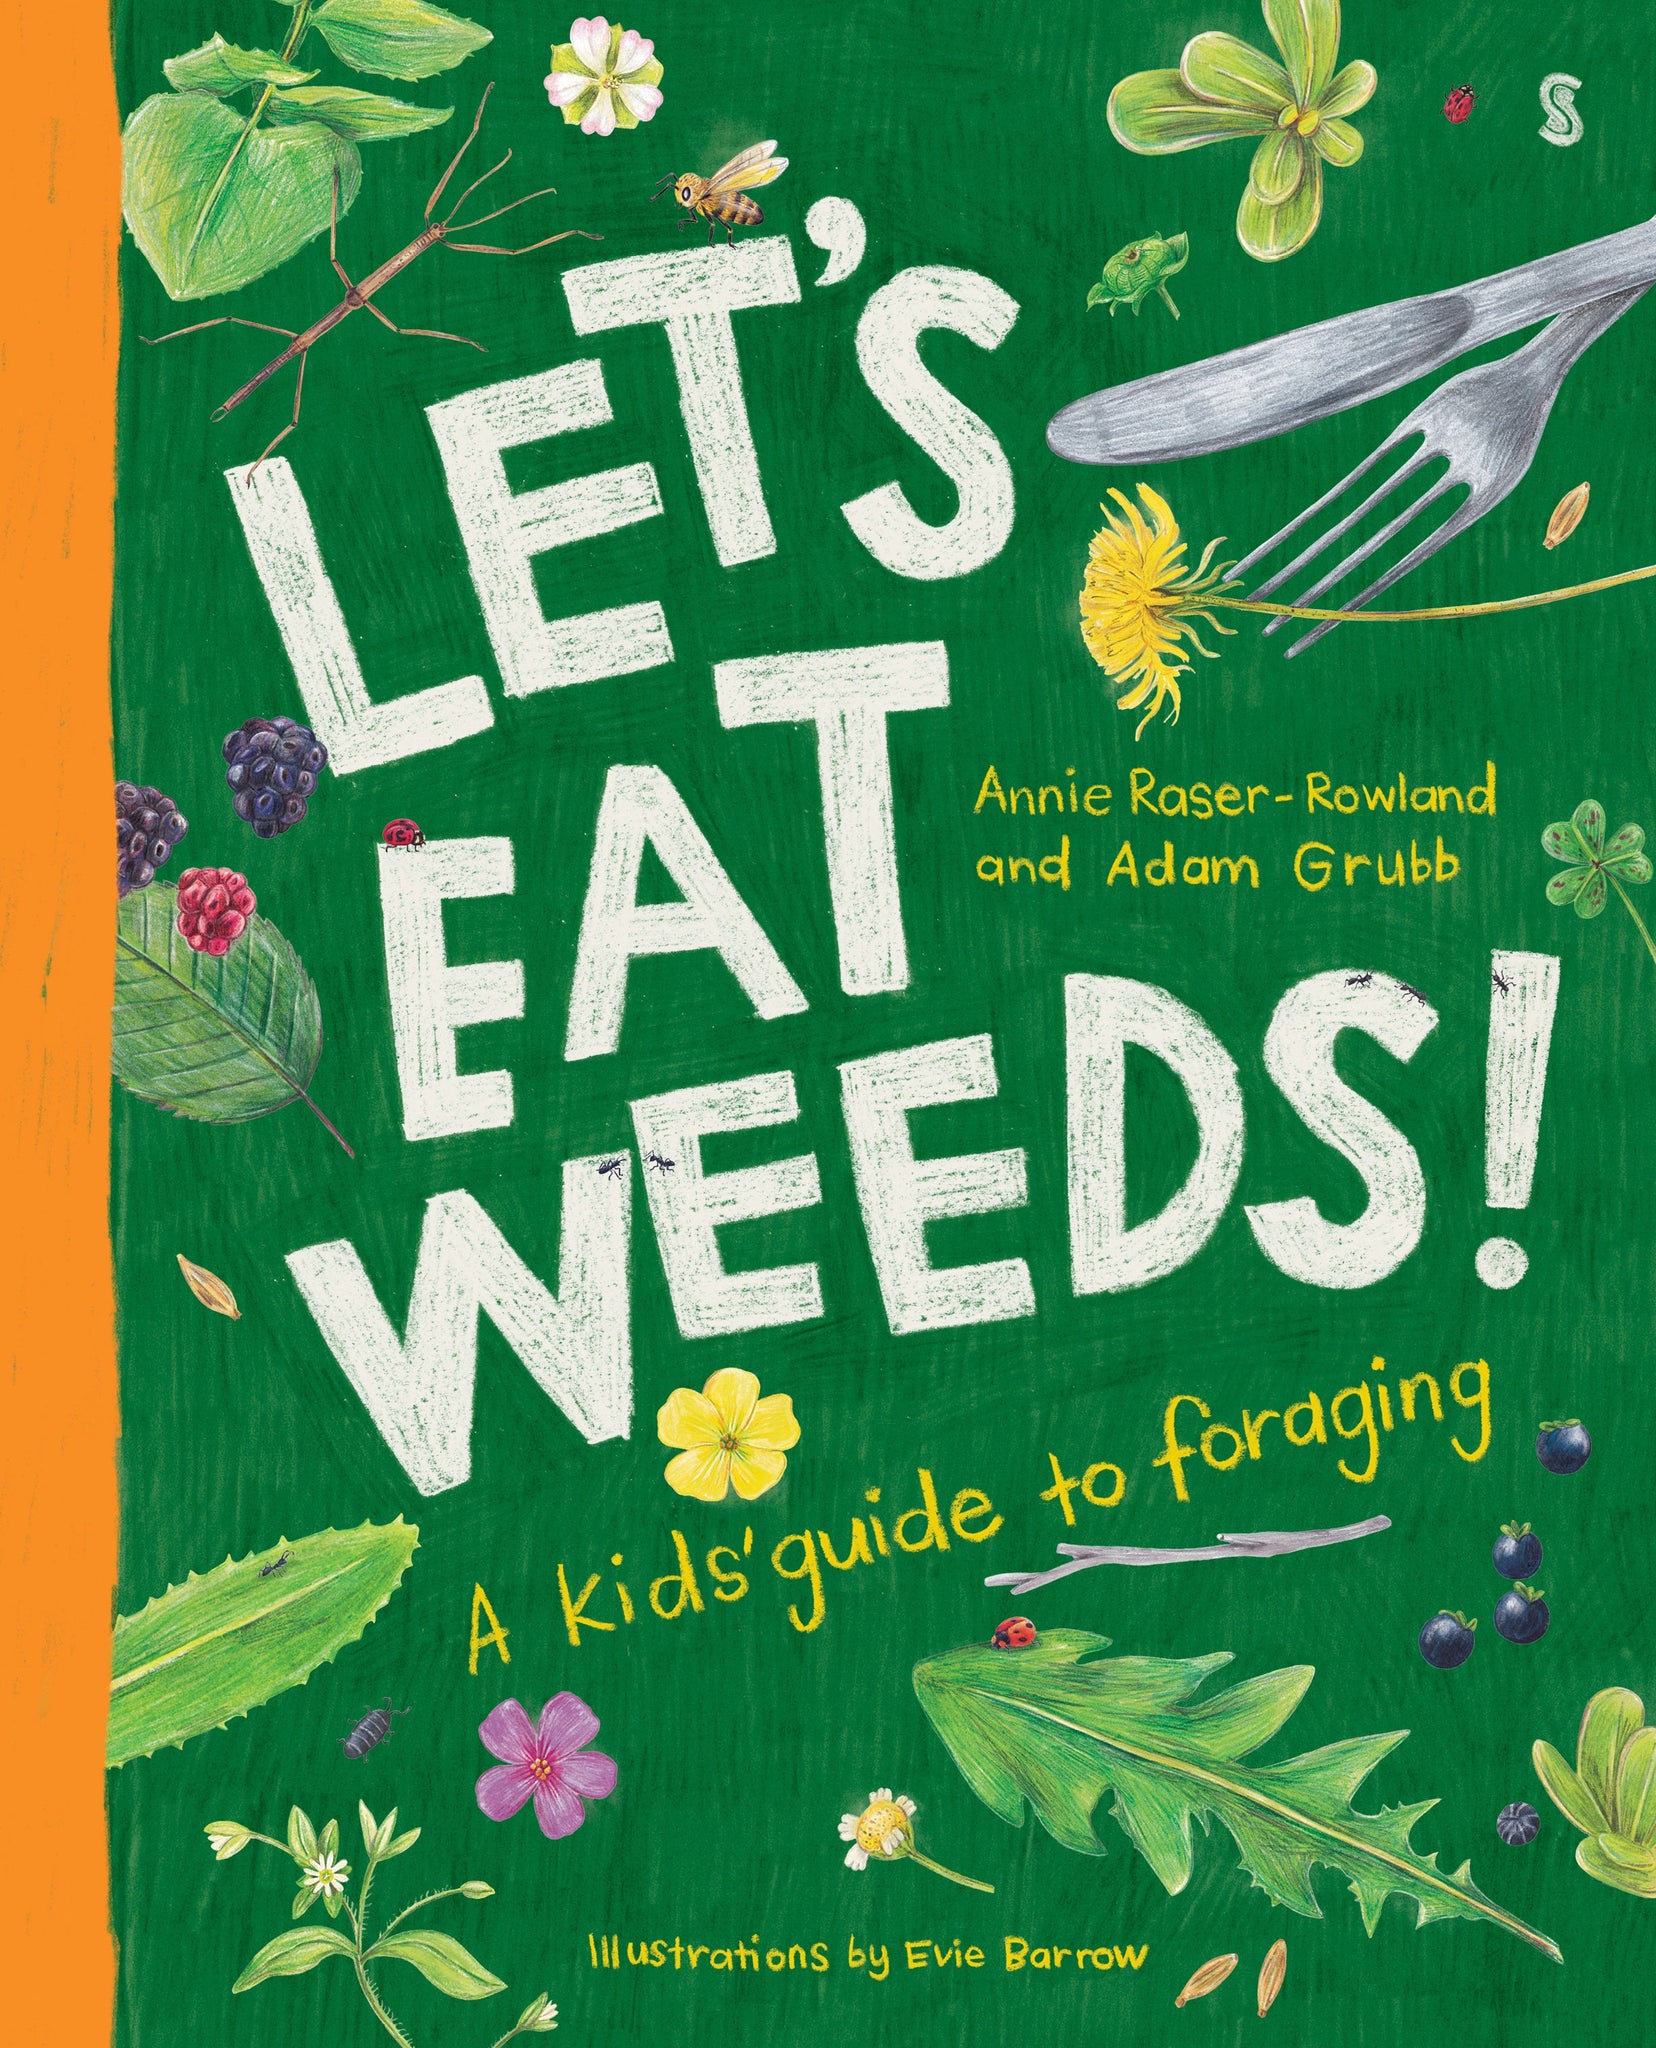 Let's Eat Weeds - A kids' guide to foraging